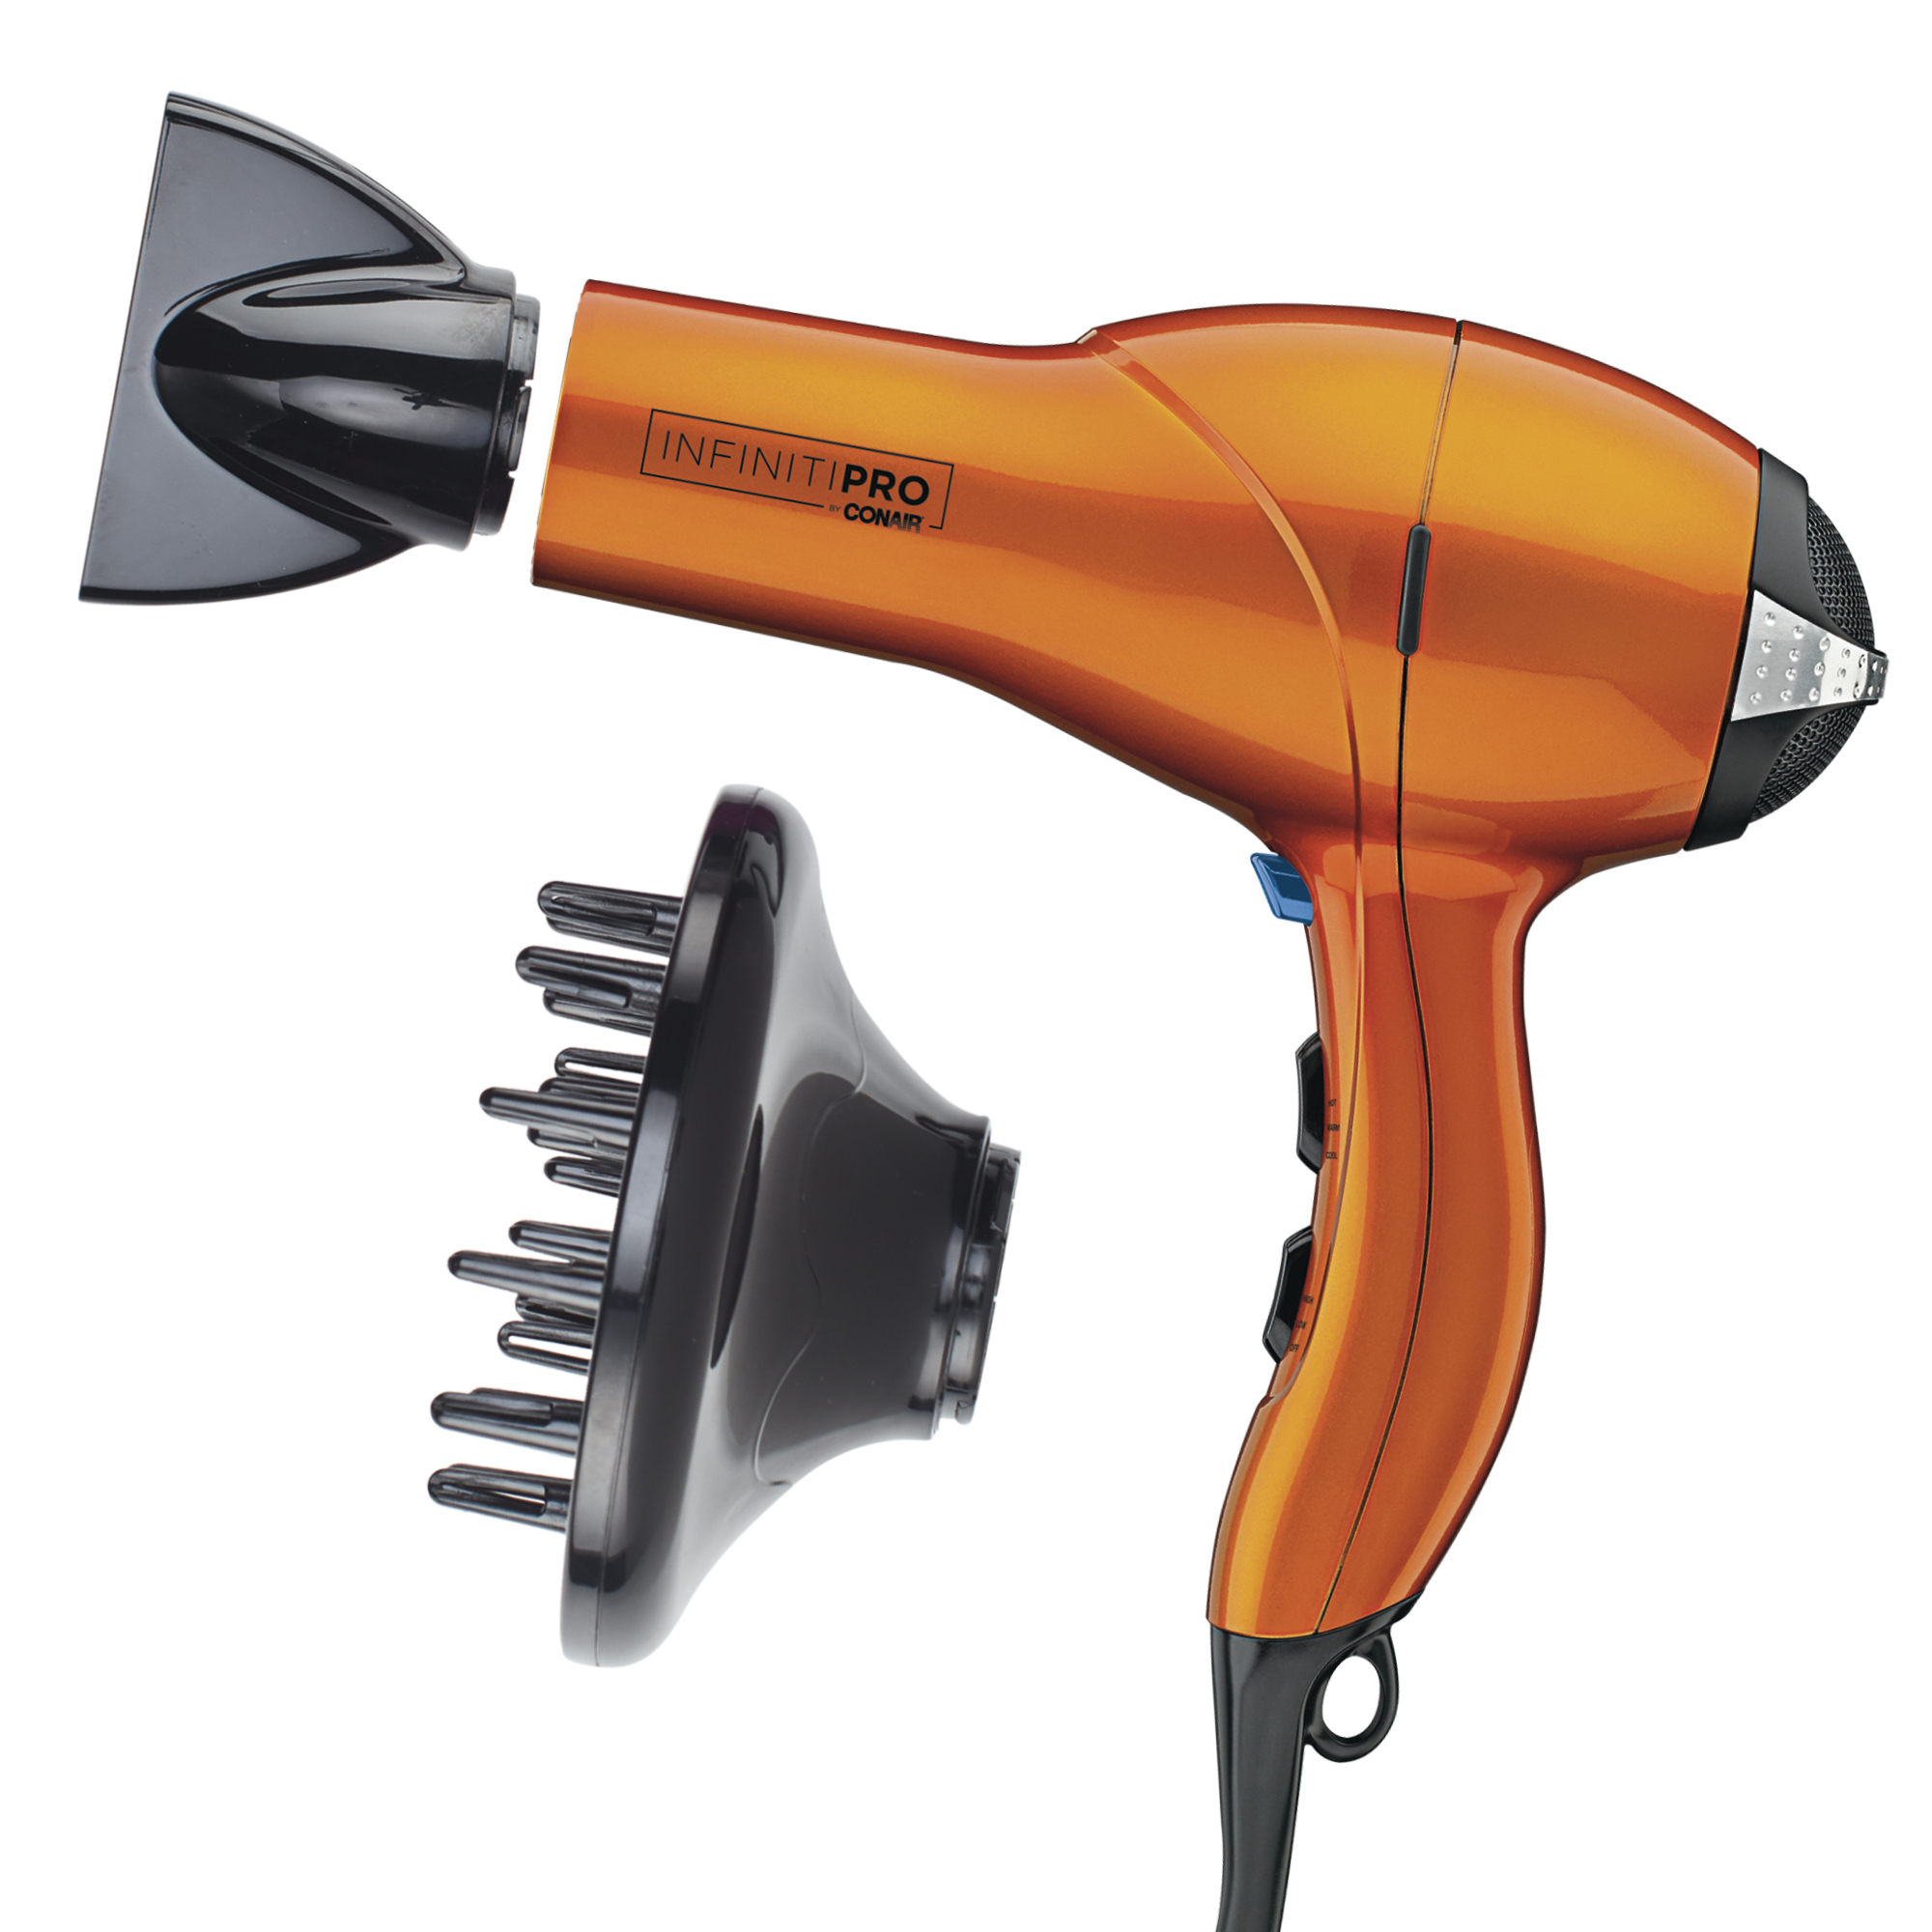 InfinitiPro by Conair Quick Styling Salon Professional Ionic & Ceramic Hair Dryer, 1875 Watts, Orange 259TPTY - image 1 of 7